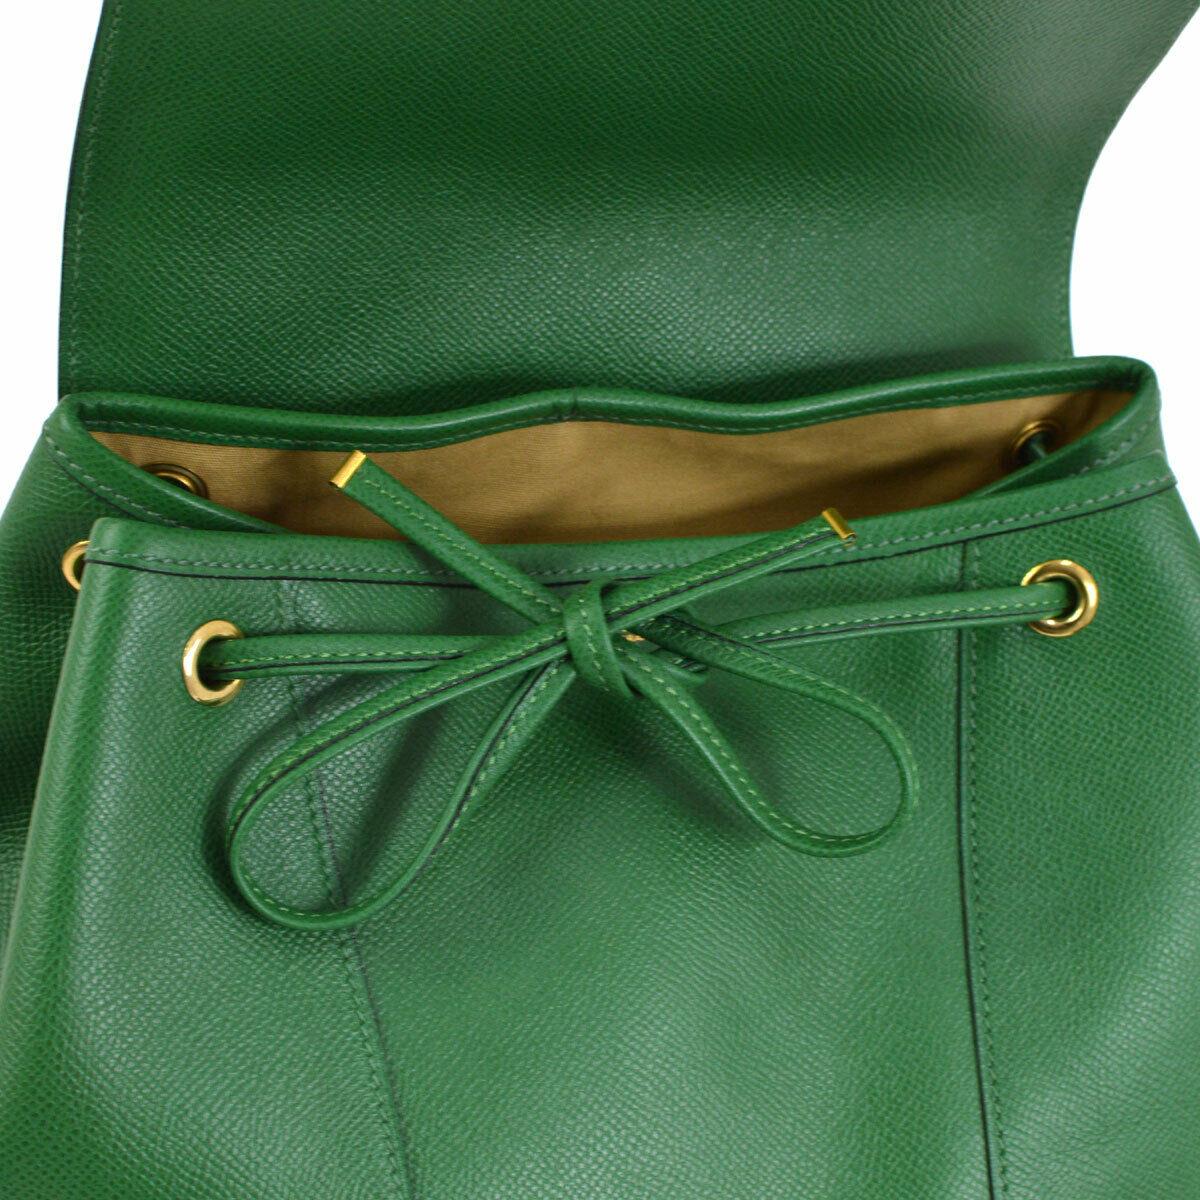 green leather backpack purse